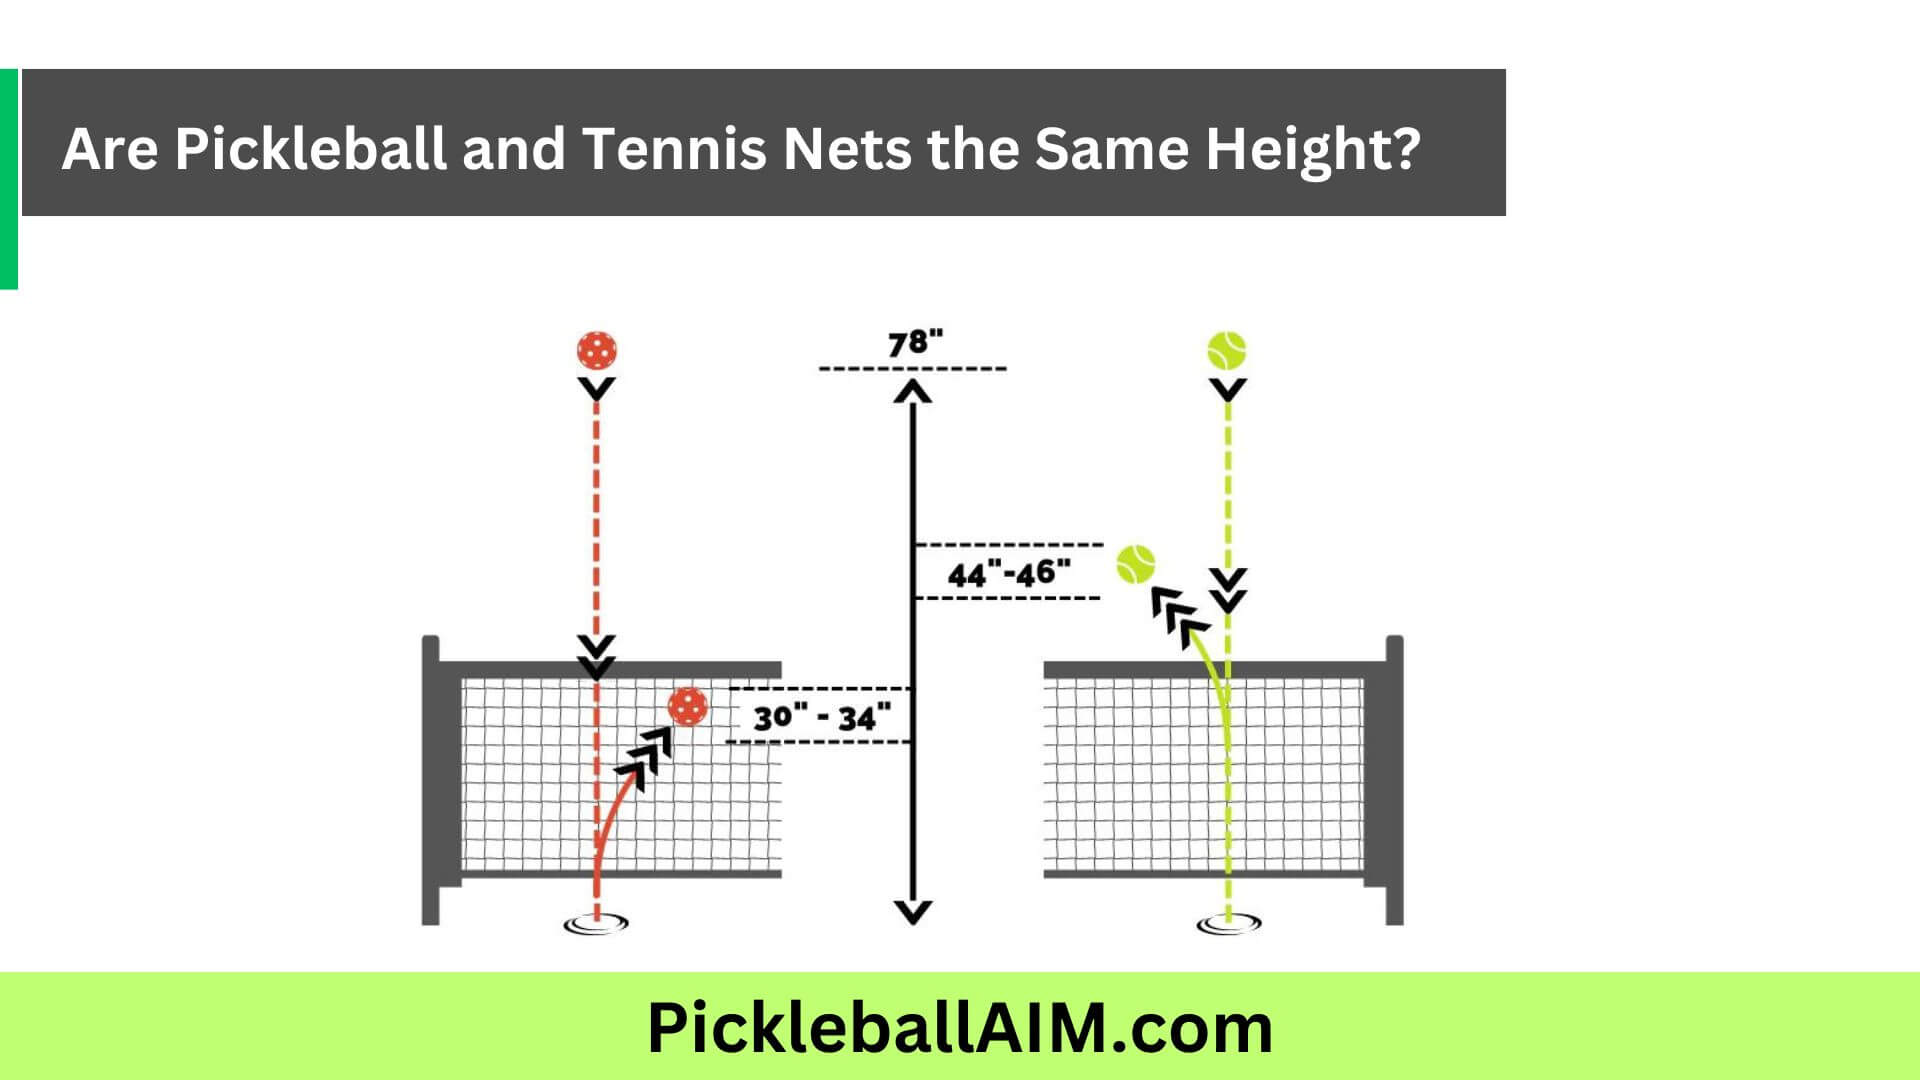 Are Pickleball and Tennis Nets the Same Height A Comparison of Net Heights in Two Popular Racquet Sports